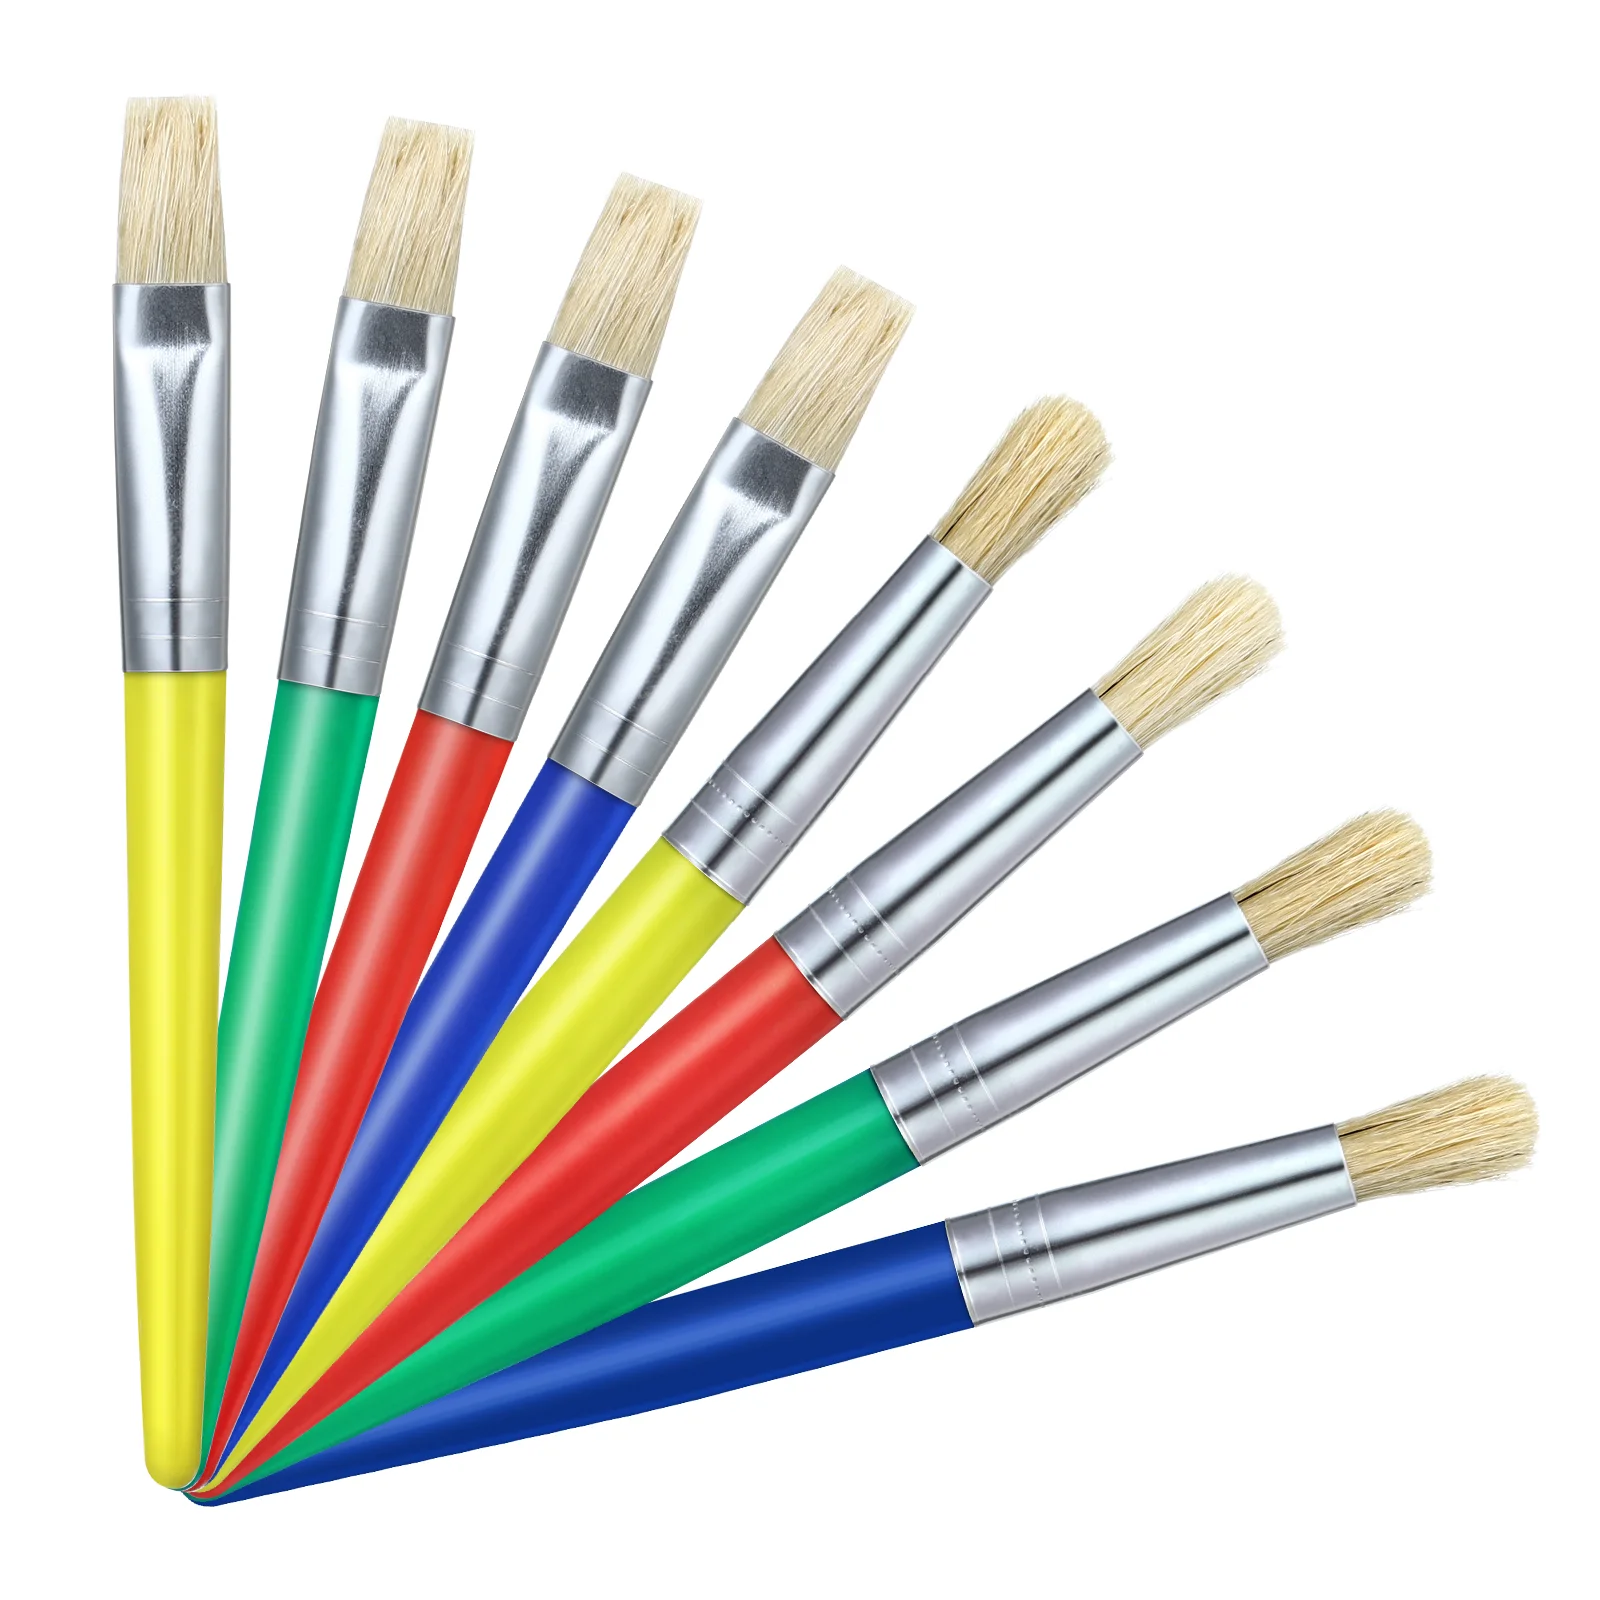 Brushes Set, Flat Pointed Painting Brush Round Tip Paintbrushes Colorful Nail Brushes for Graffiti Drawing DIY Craft Artist